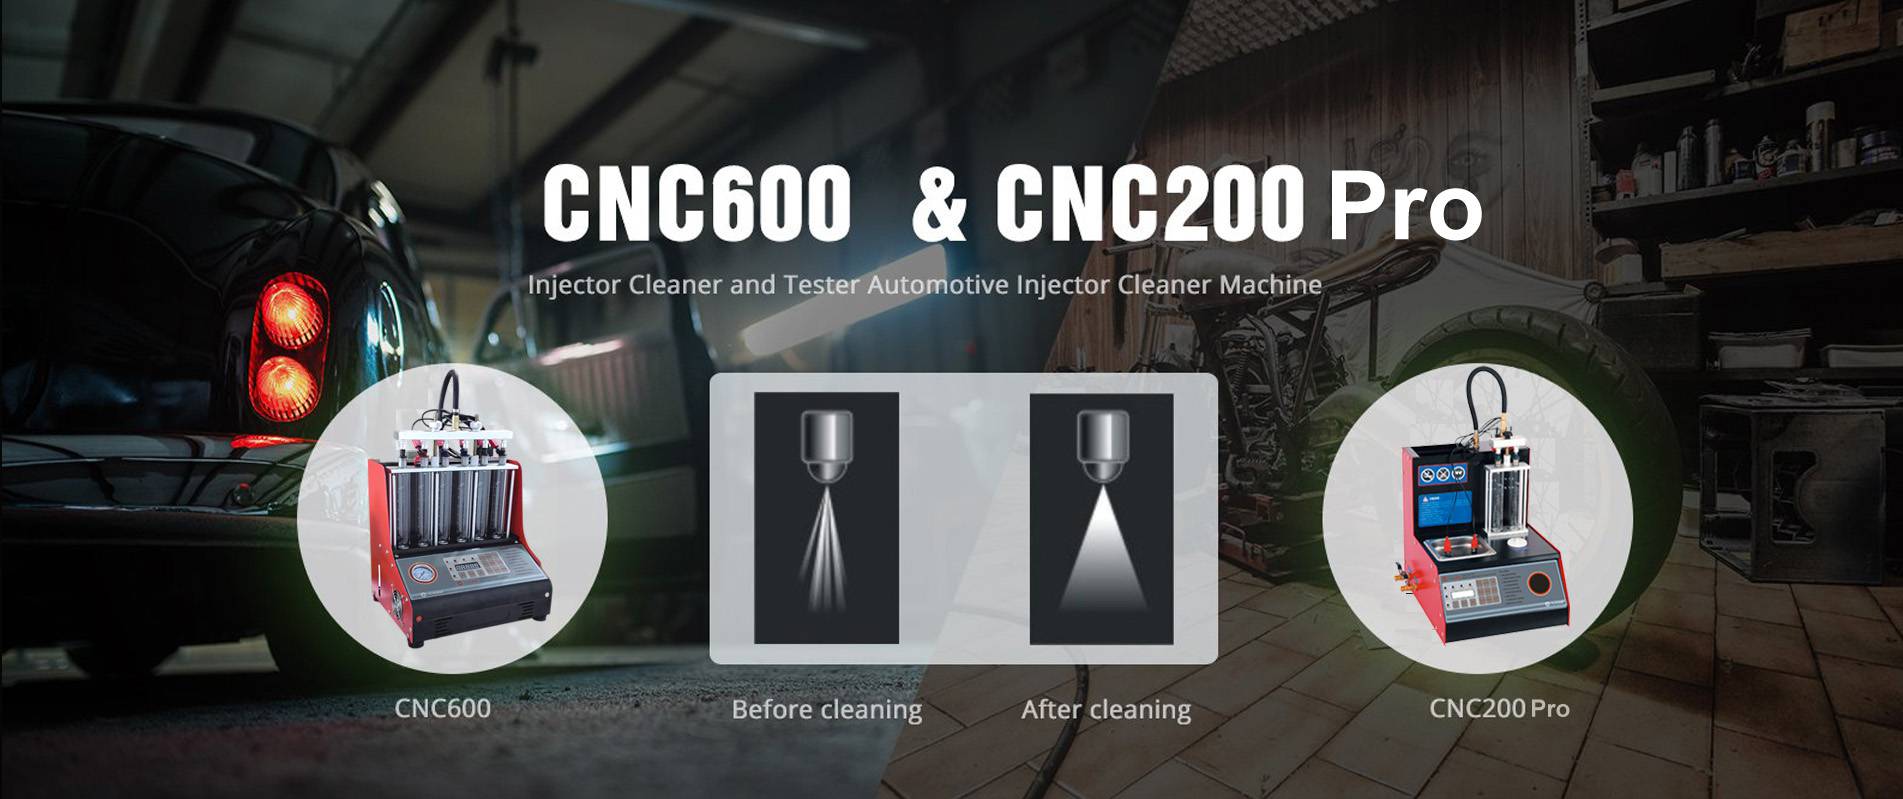 Injector Cleaner and Tester